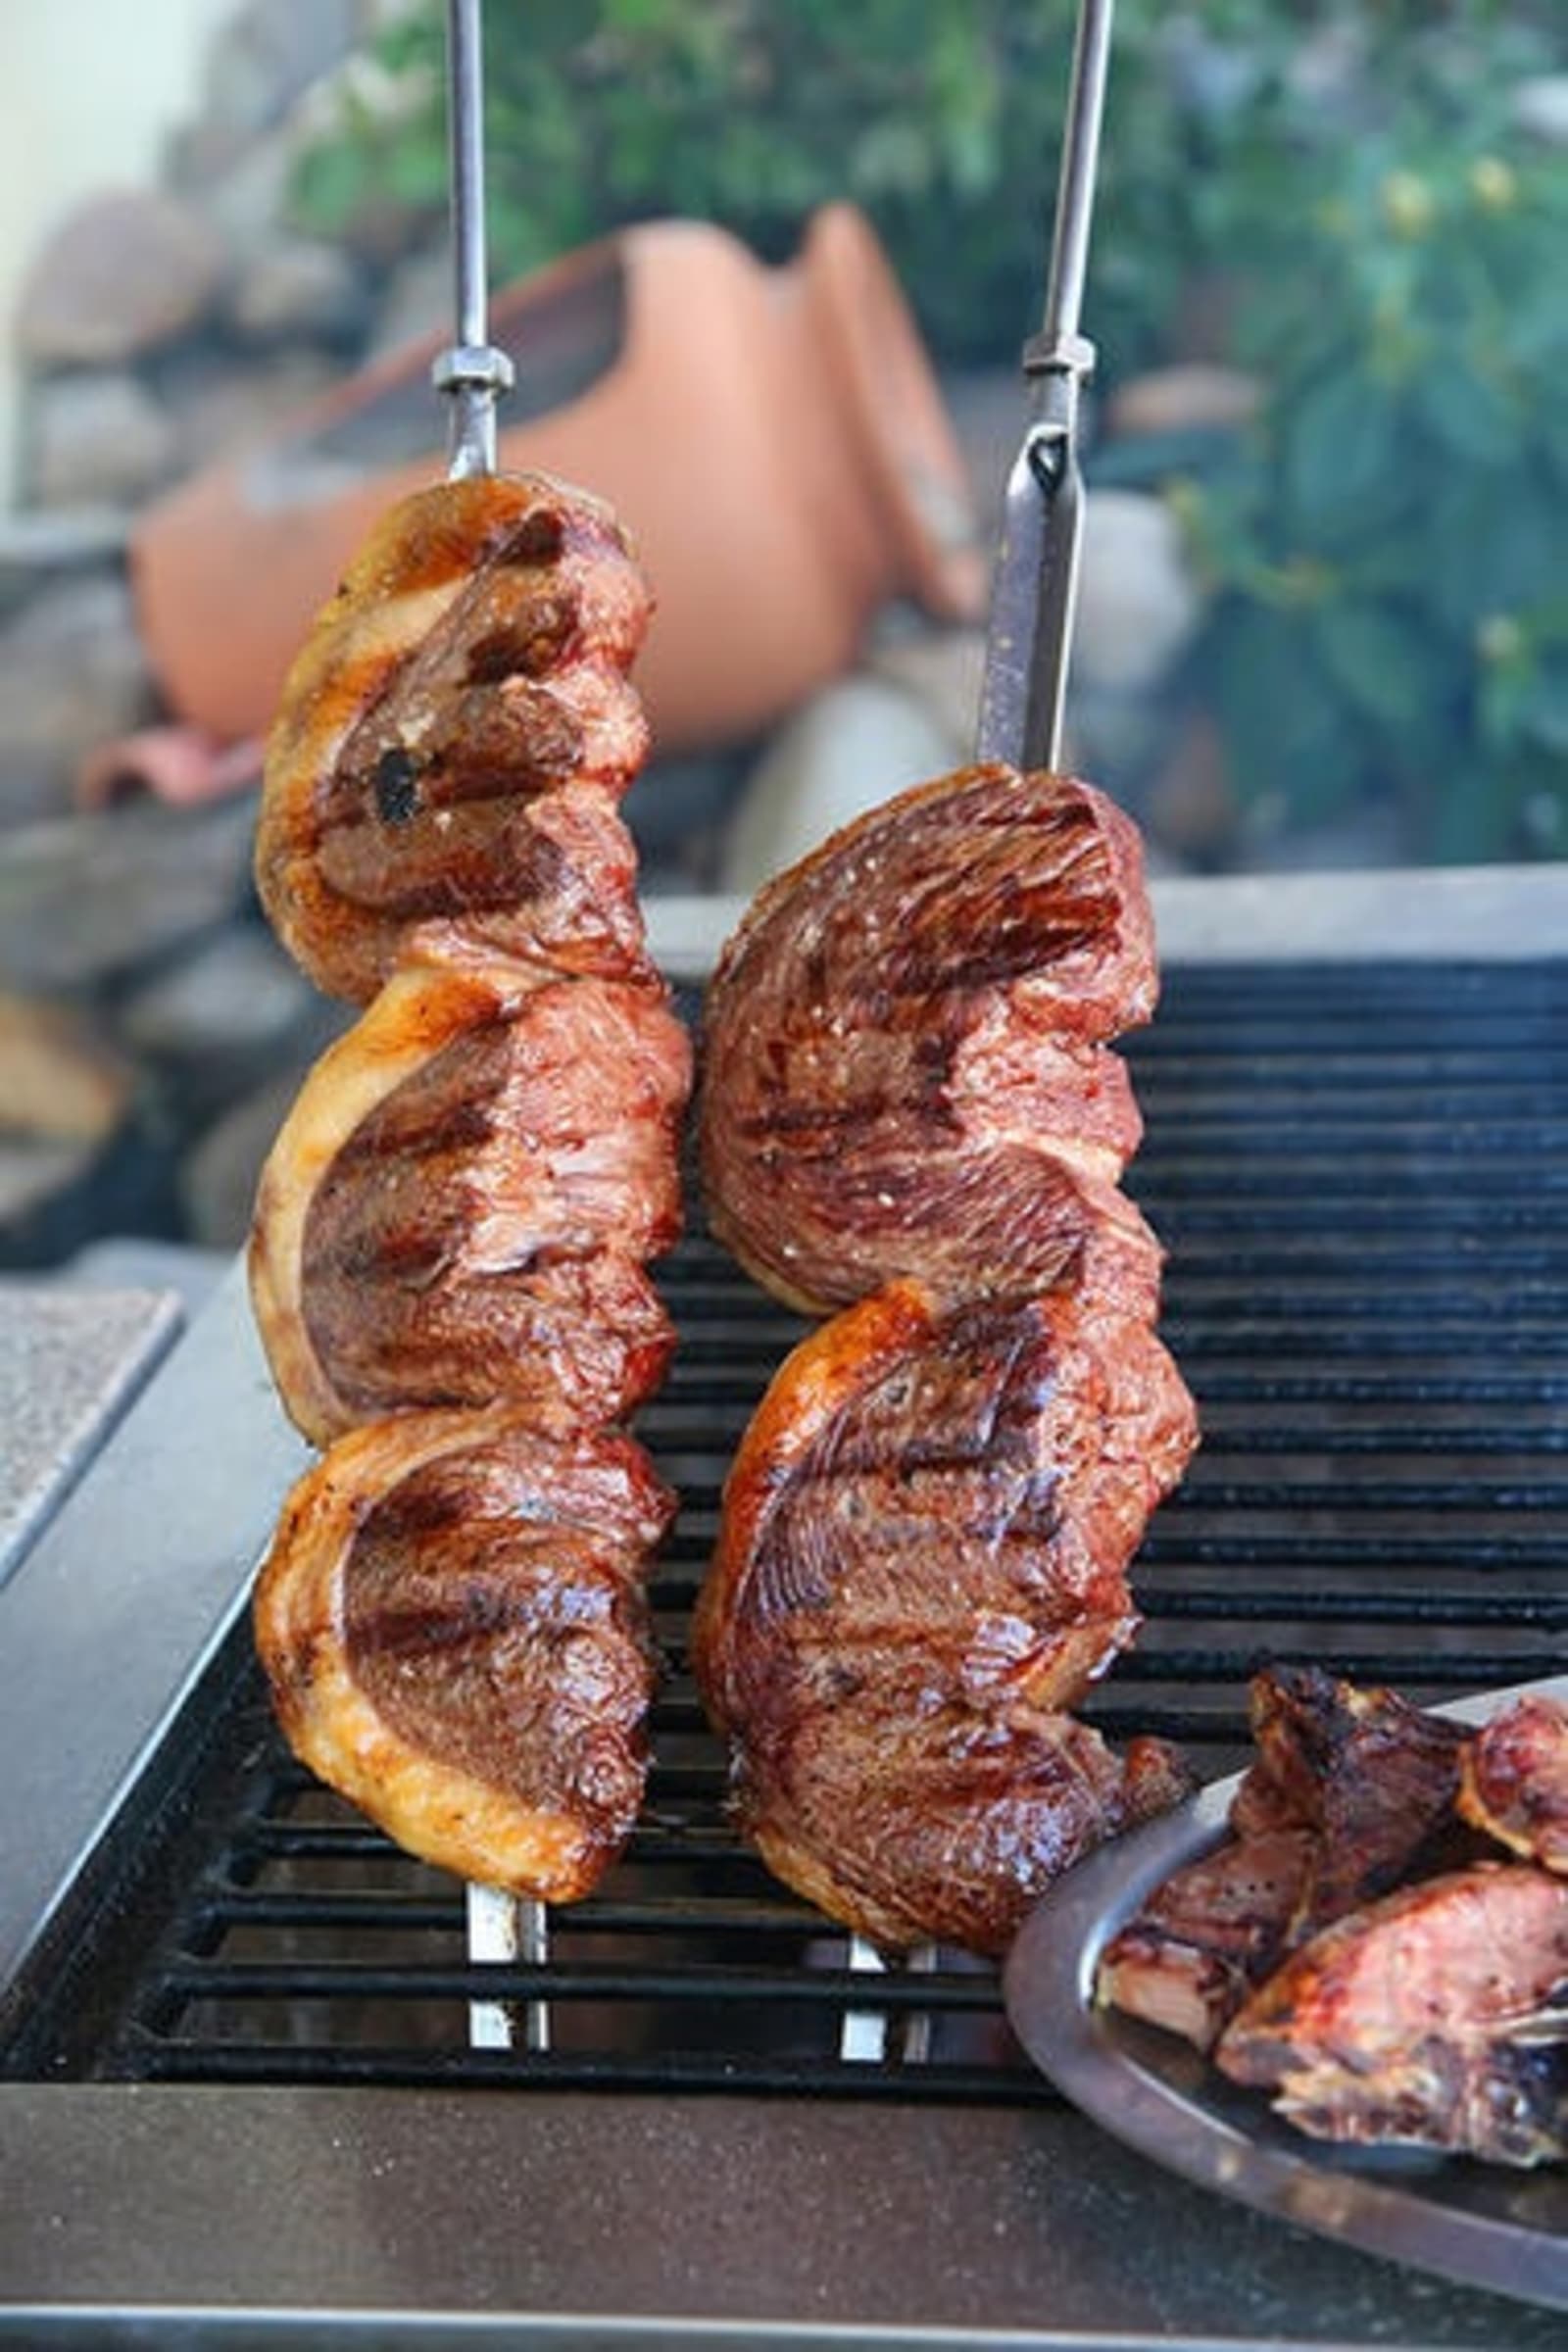 RS-Rodizio-barbecued-meat-shutterstock_21482644.jpg